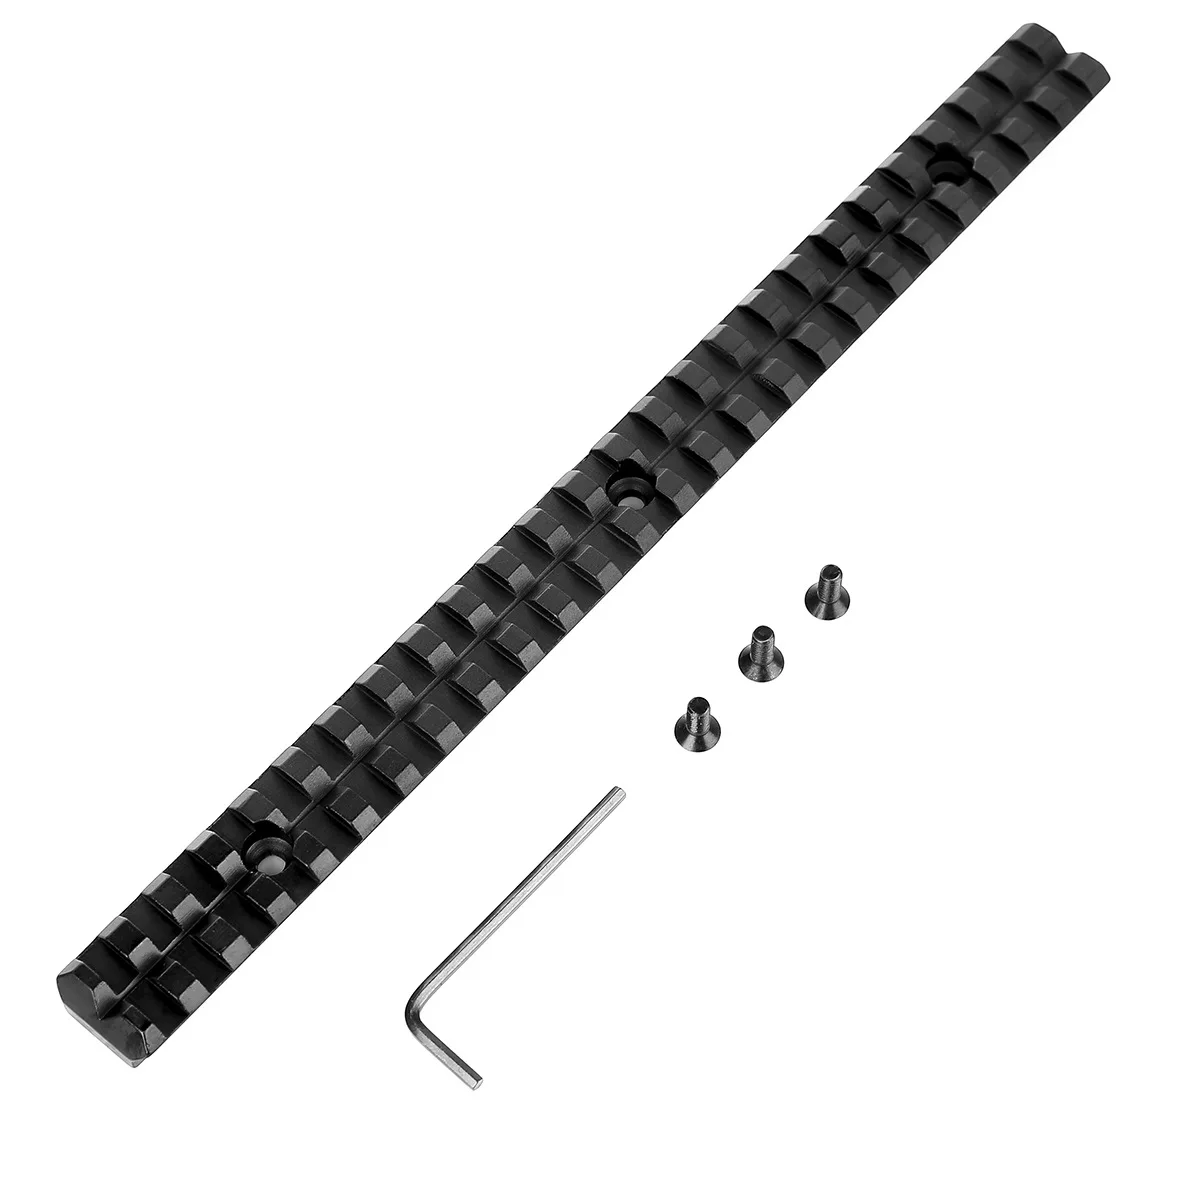 

25 Slots Long Base Tactical Scope Mount Picatinny Rail Weaver 20mm Adapter Airsoft Hunting Rifle Gun Sight Accessories 257mm